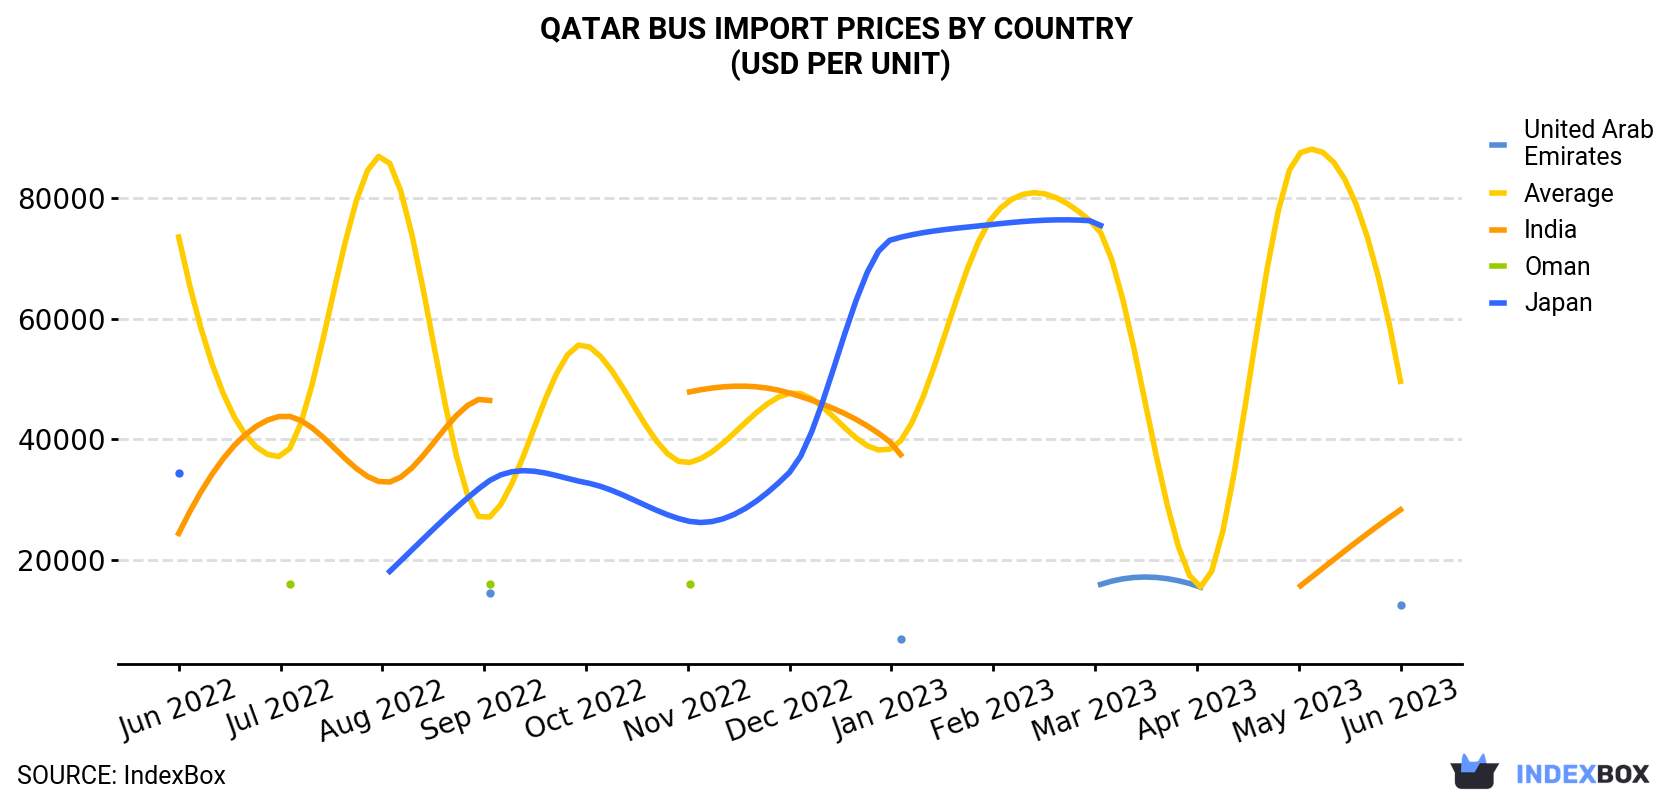 Qatar Bus Import Prices By Country (USD Per Unit)